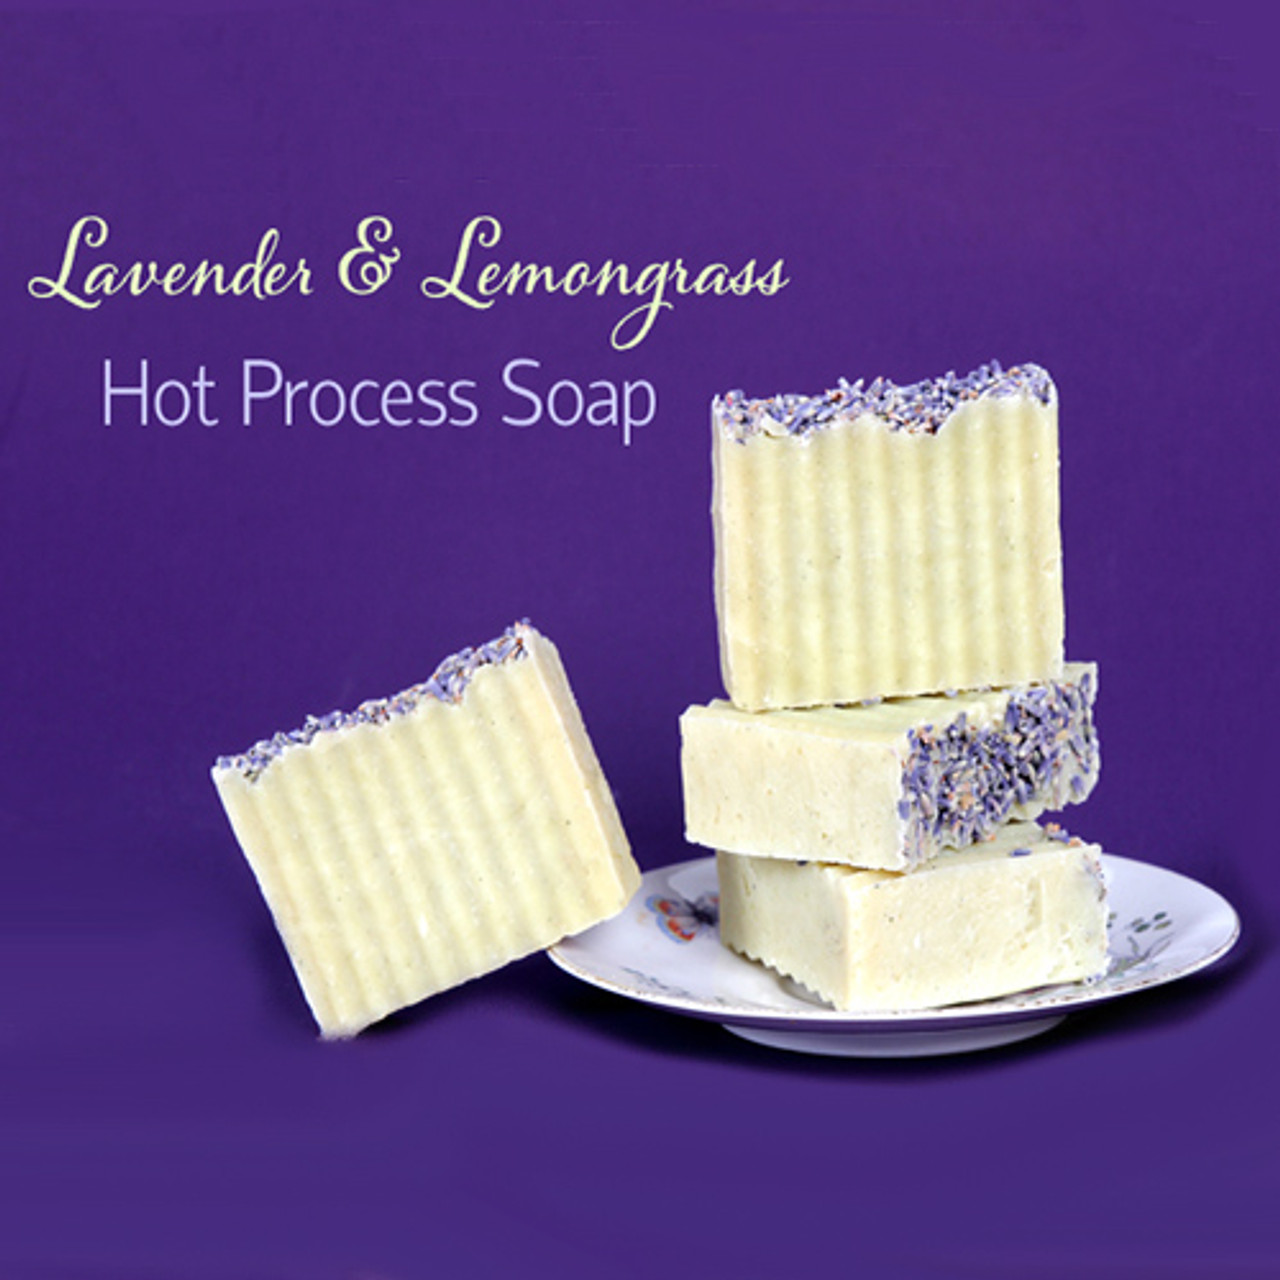 Cold Process v sHot Process Soap (Which is Best?)